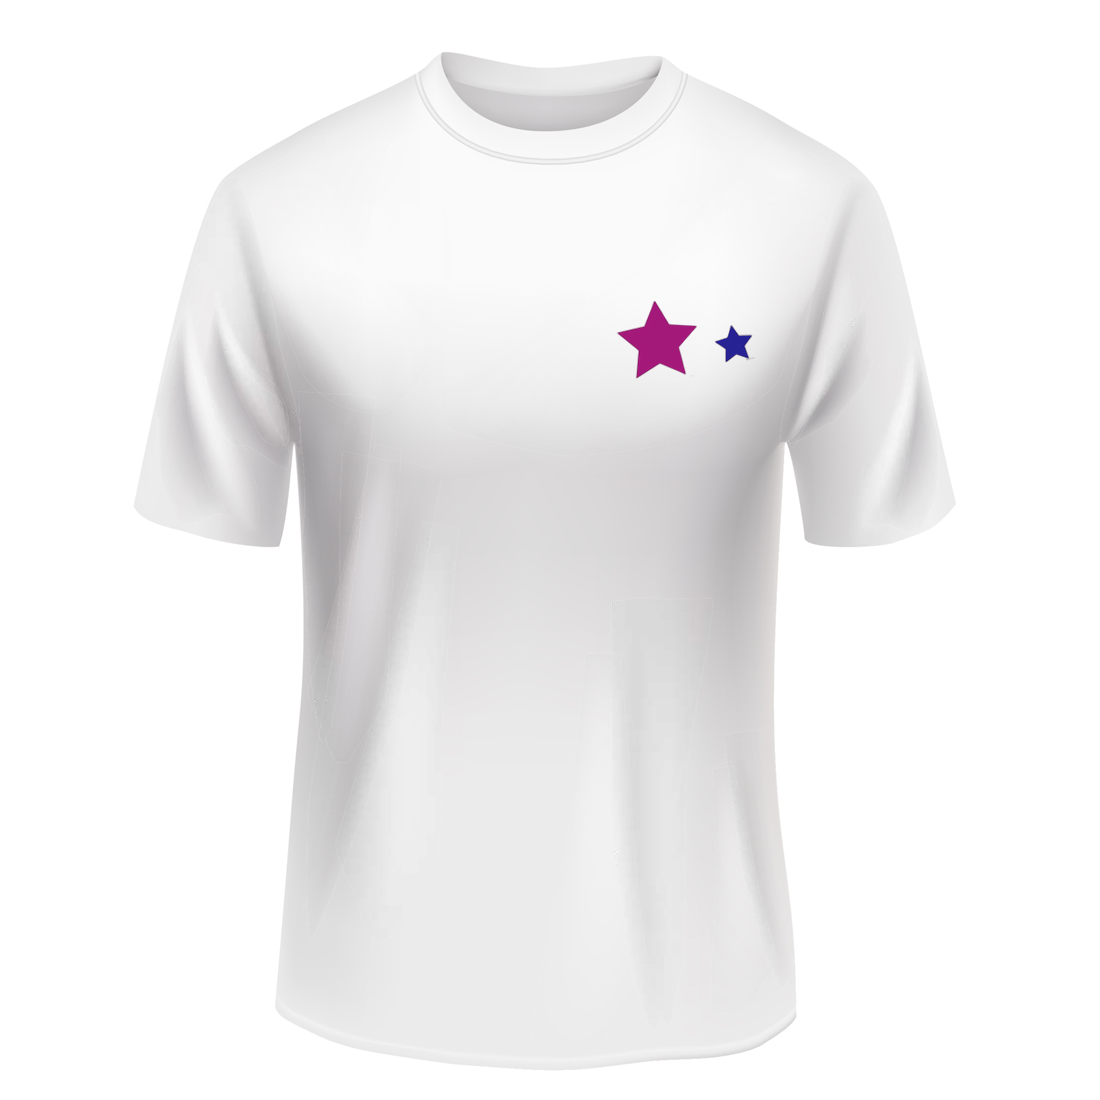 T-shirt design for printing - Moon | Stars preview image.